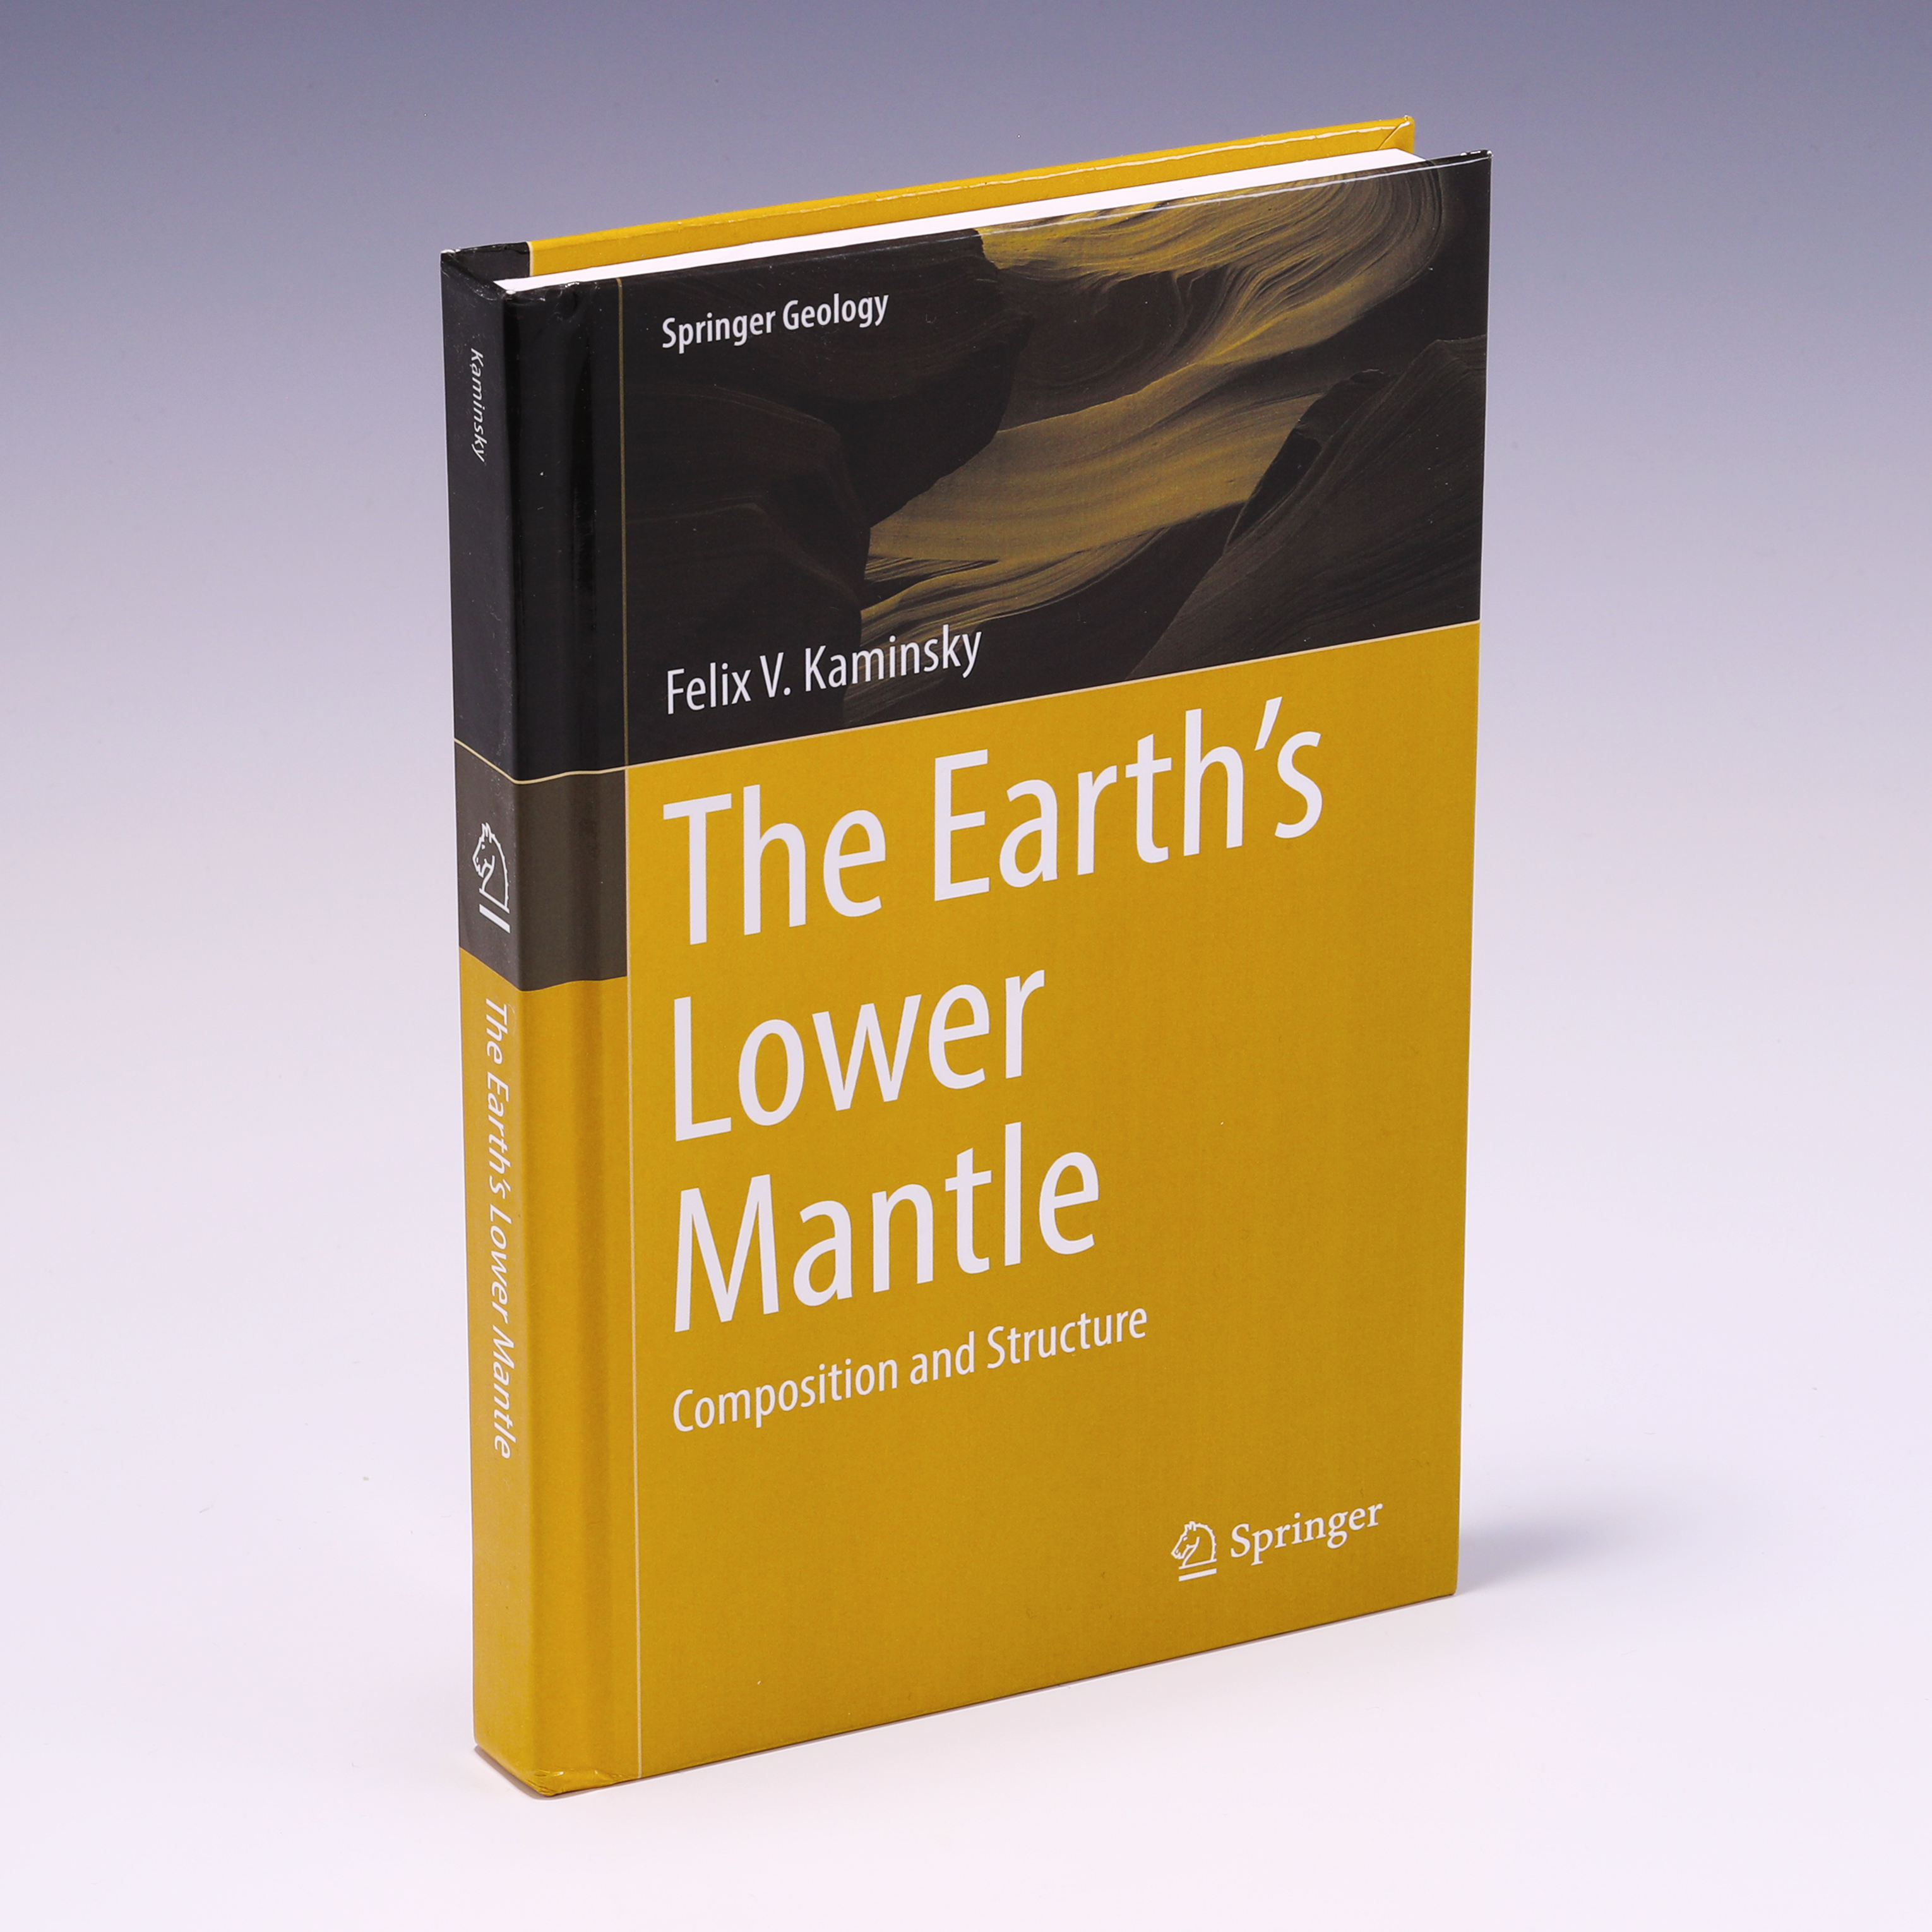 The Earth's Lower Mantle: Composition and Structure (Springer Geology) - Felix V. Kaminsky